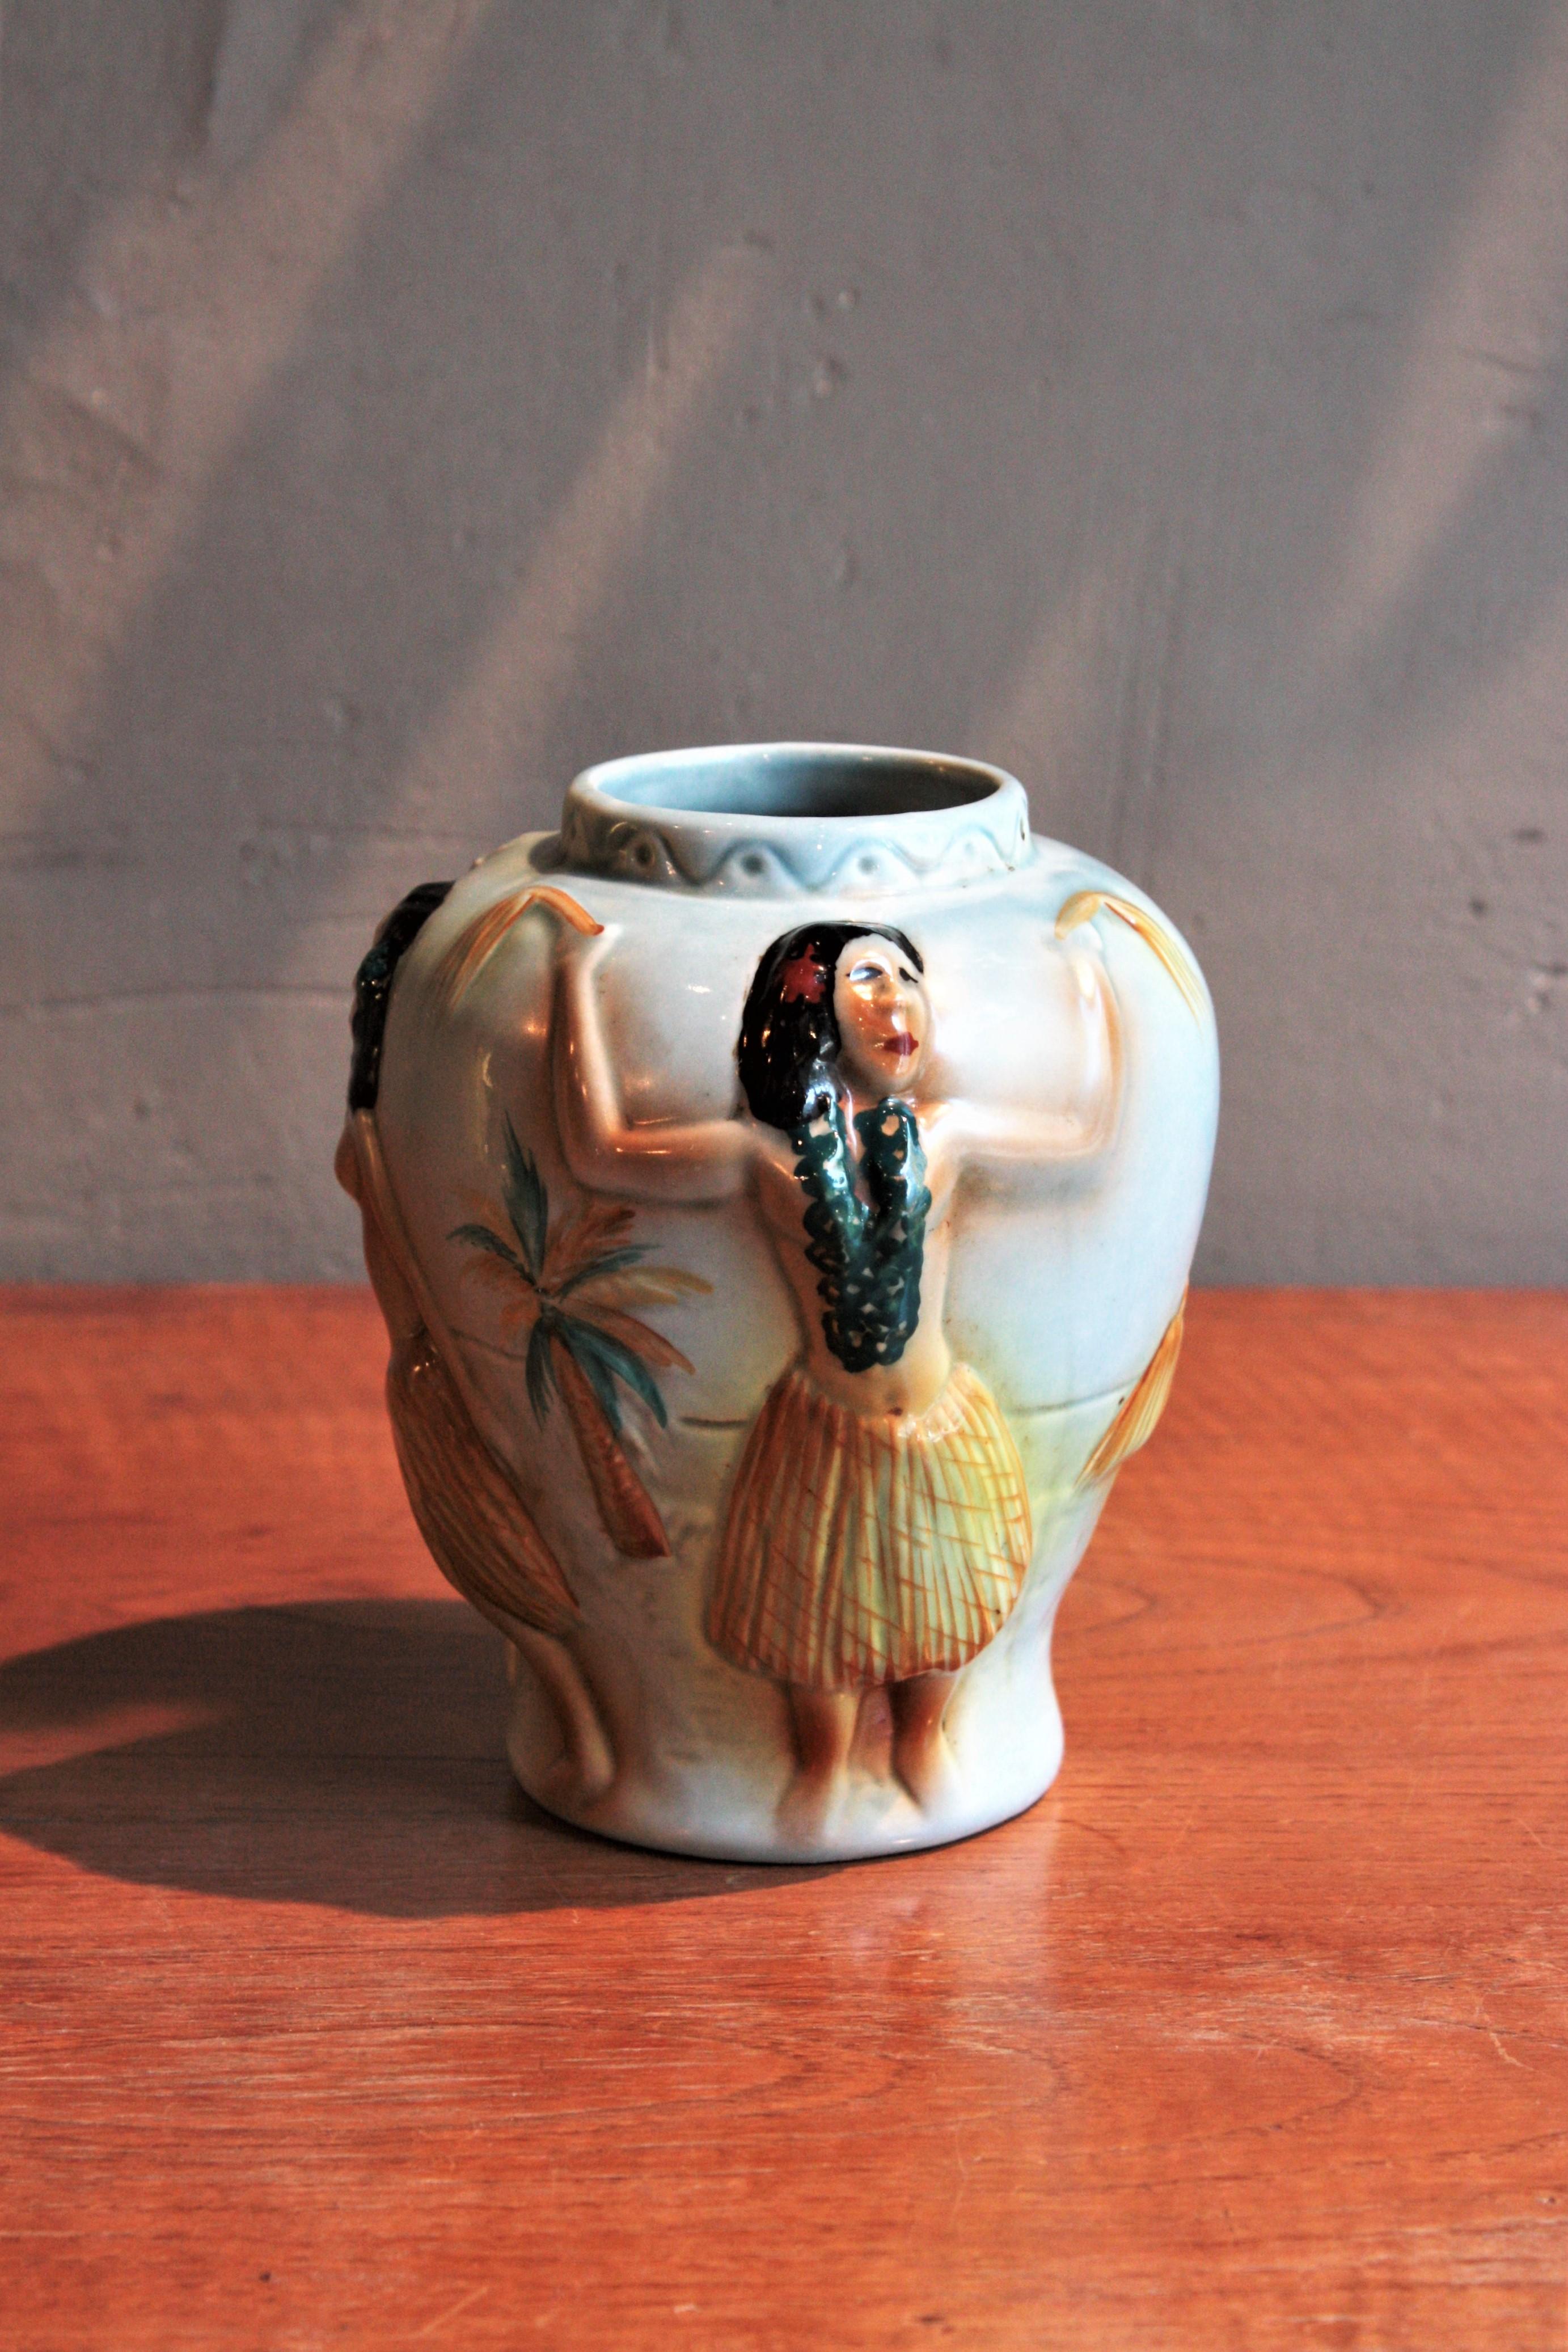 Spanish Midcentury Glazed Ceramic Vase with Hand-Painted Hula Dancers Motif For Sale